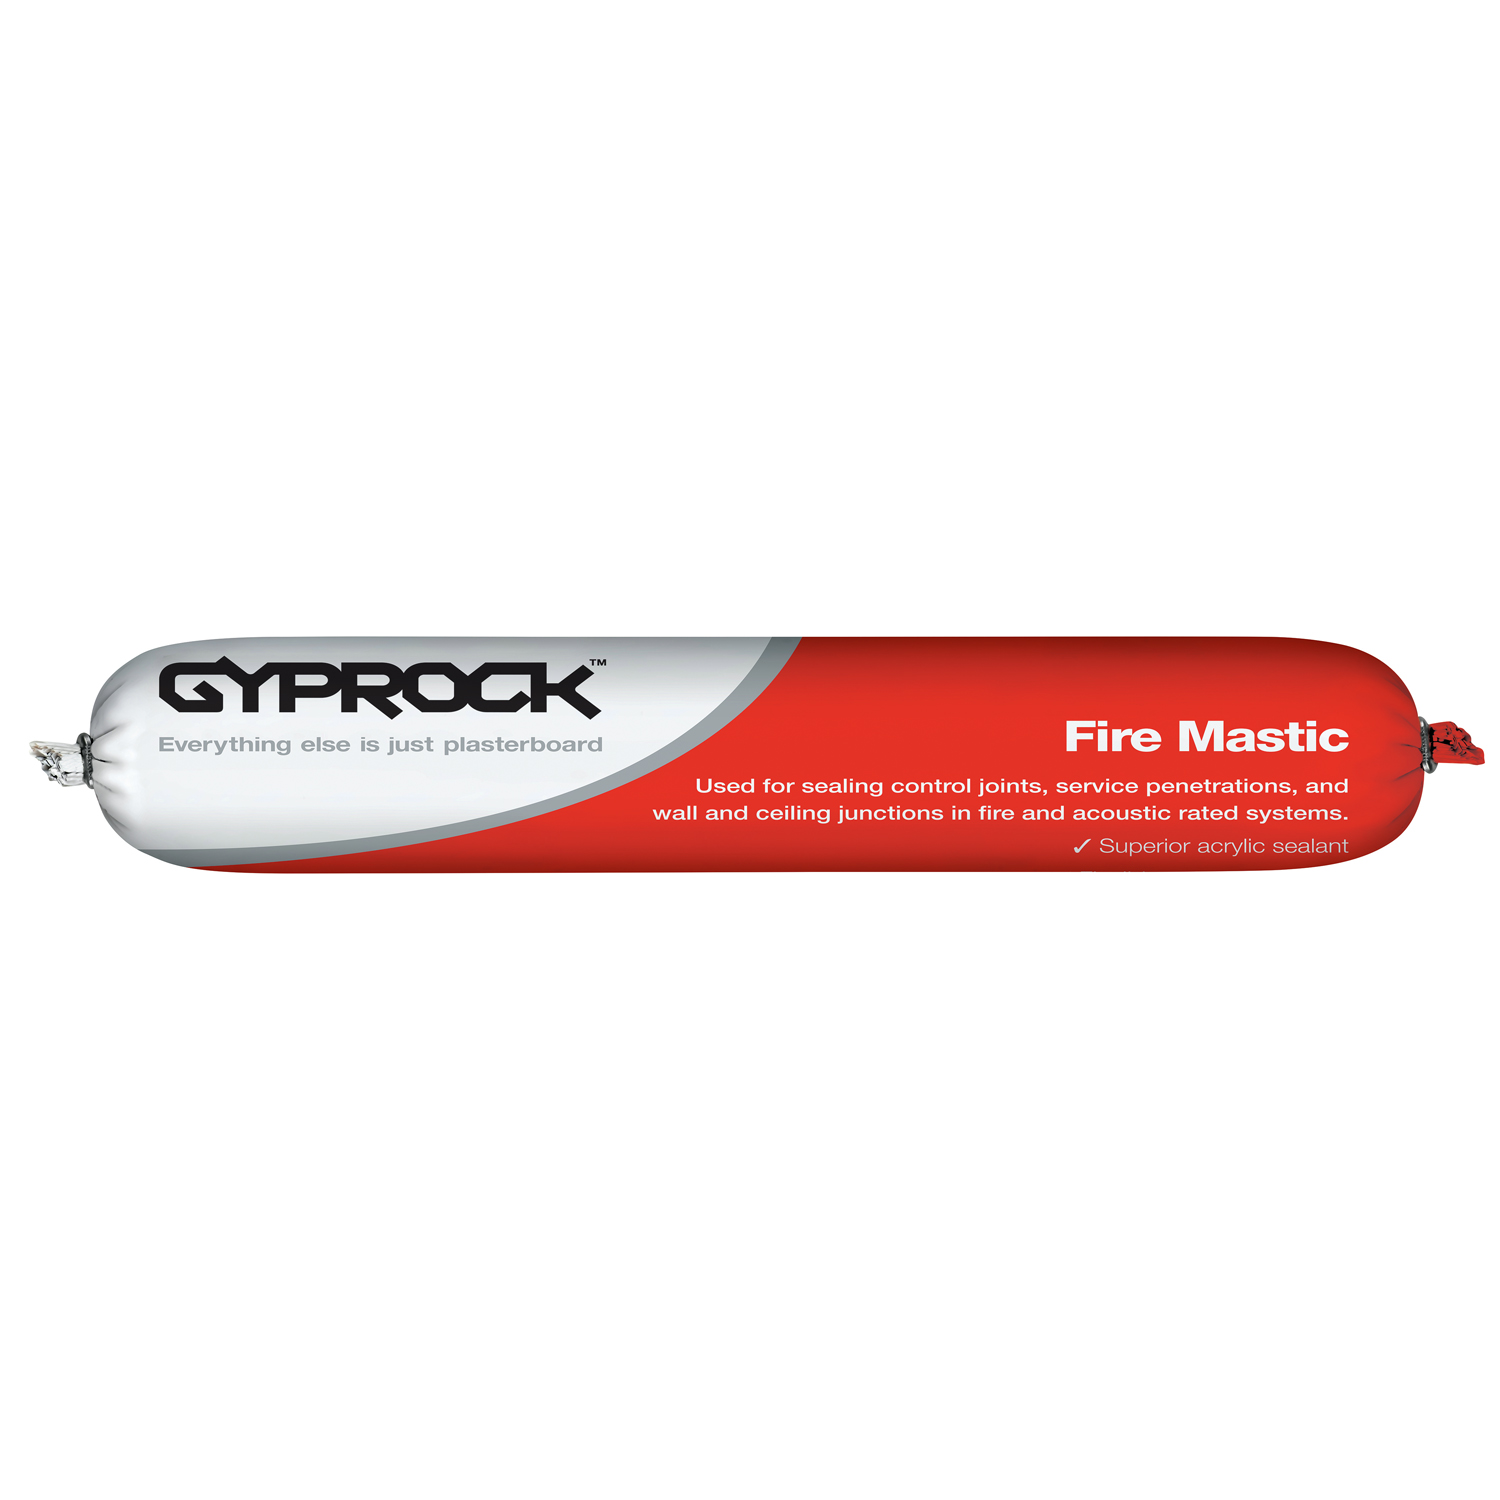 Gyprock Fire Mastic Acoustic And Fire Rated Sealant